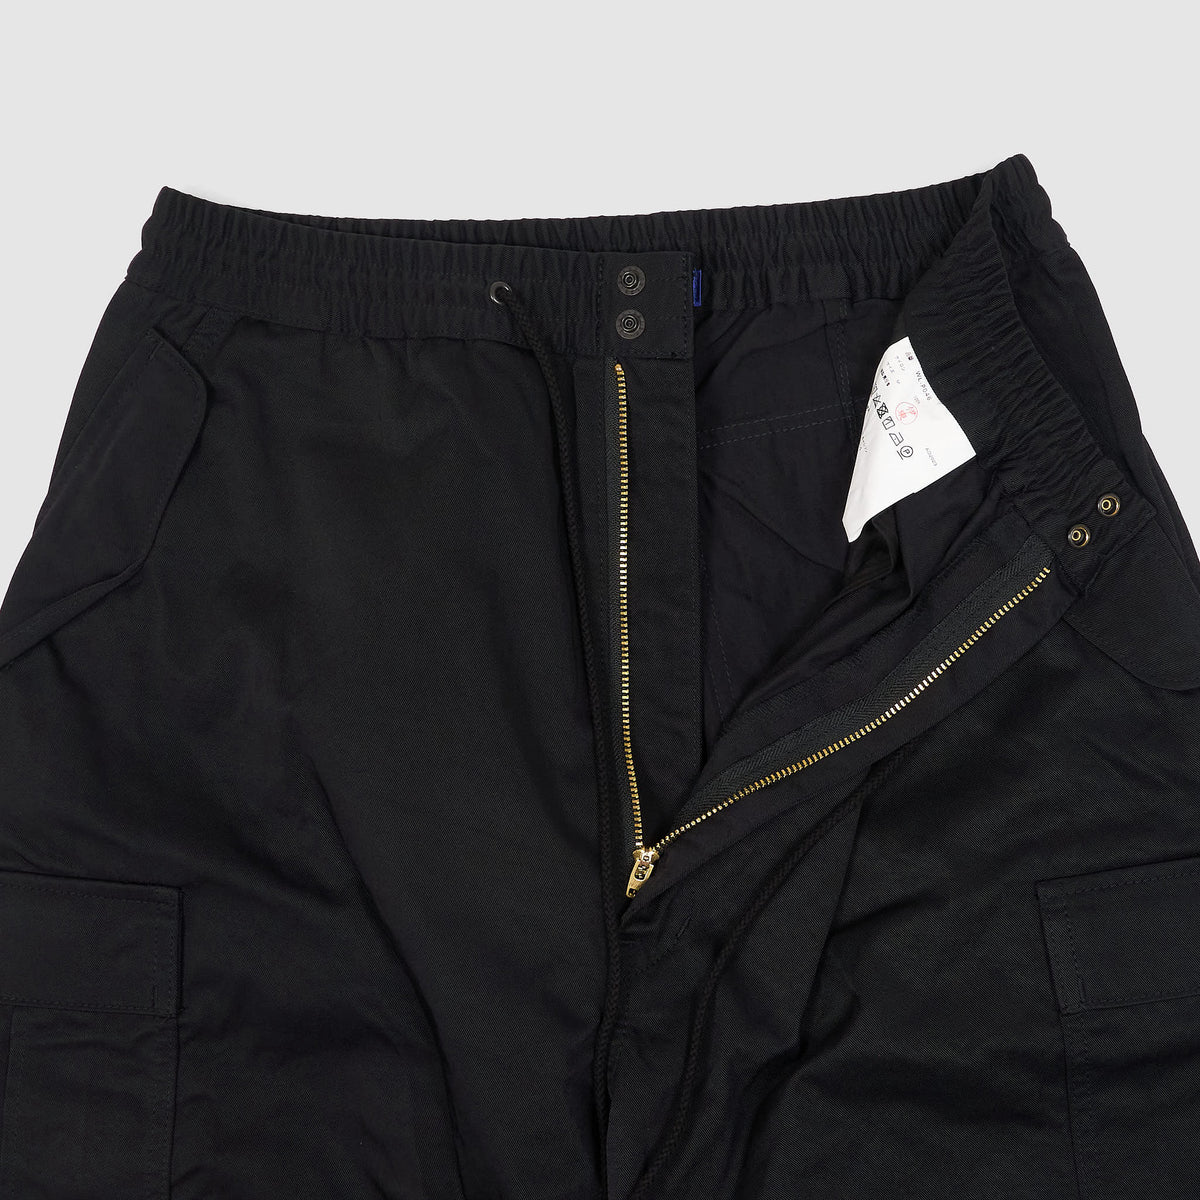 Junya Watanabe Man Wiode Fiotted Cargo Pants